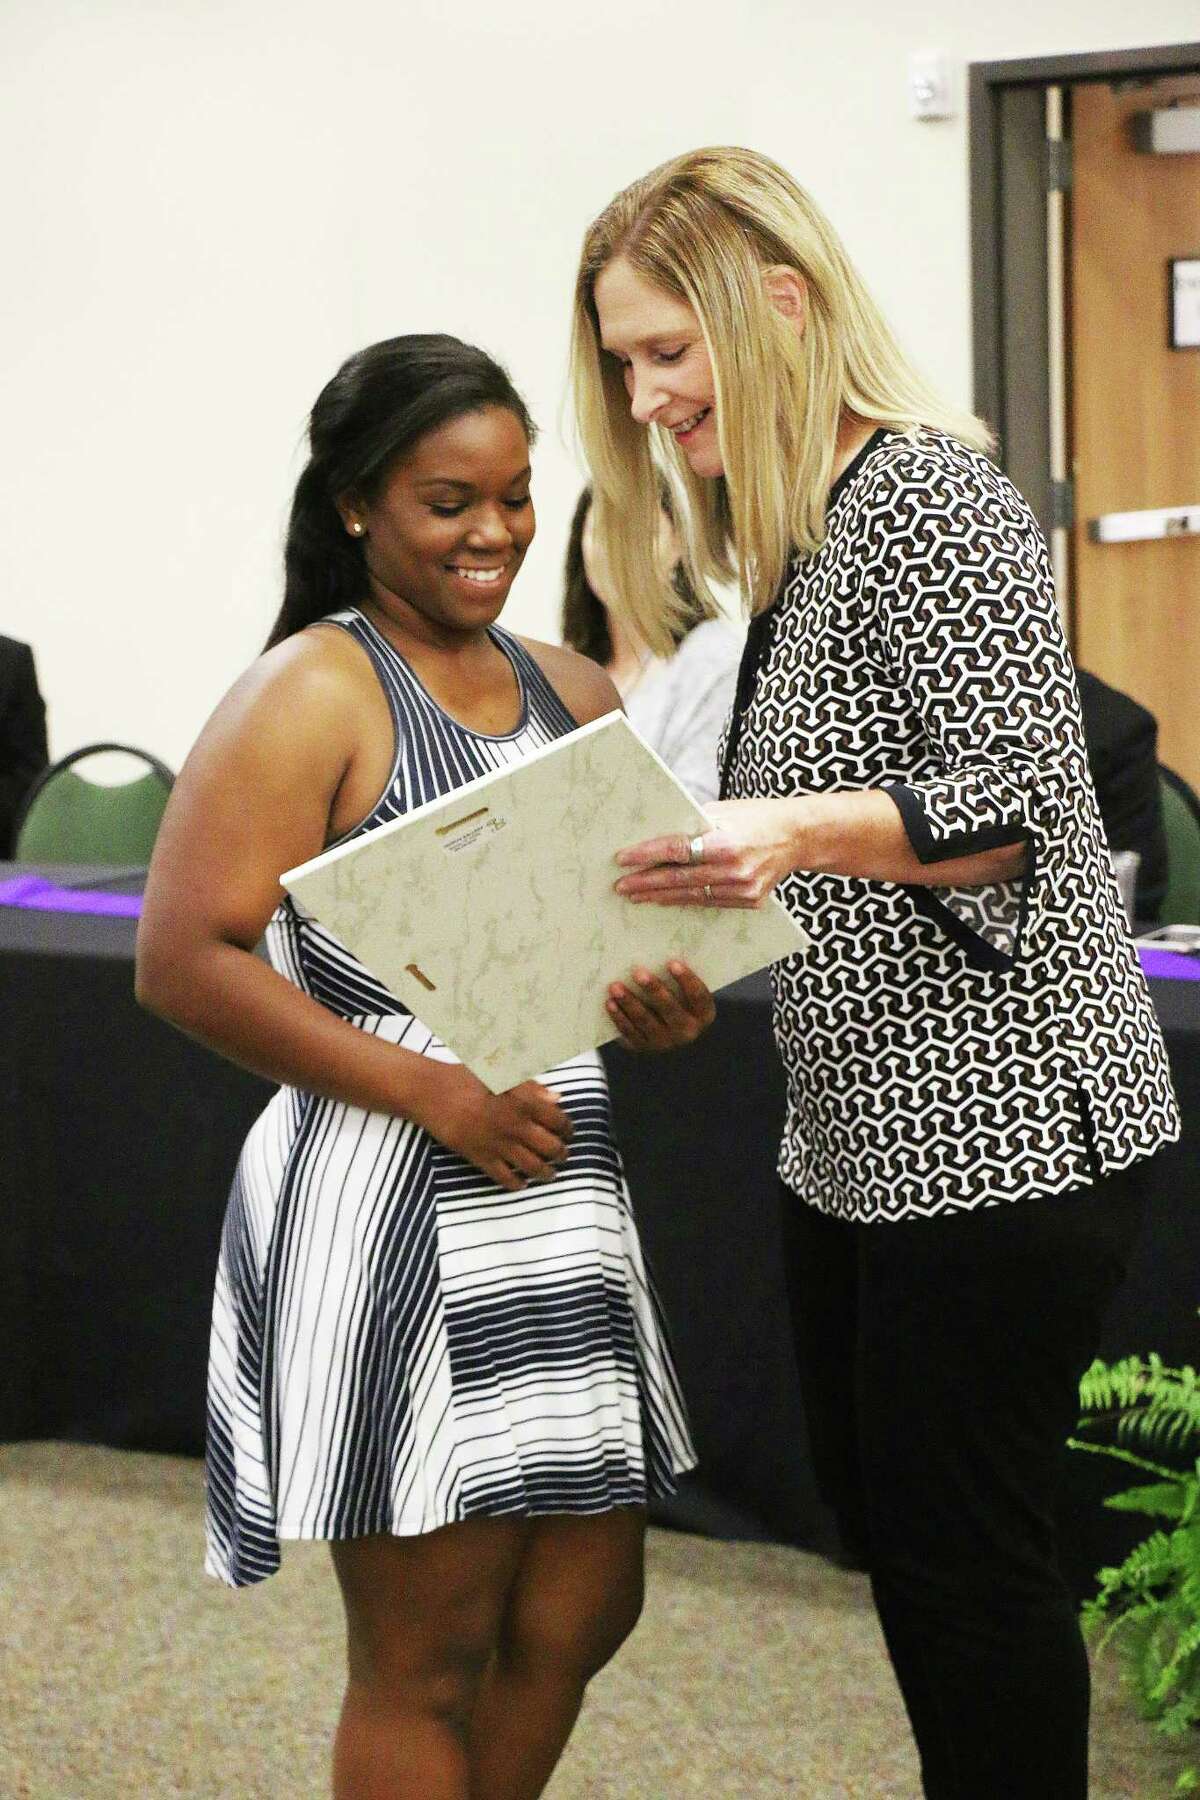 Jayla Pruitt accepts the award as the Dayton High School Female Athlete of the Year.